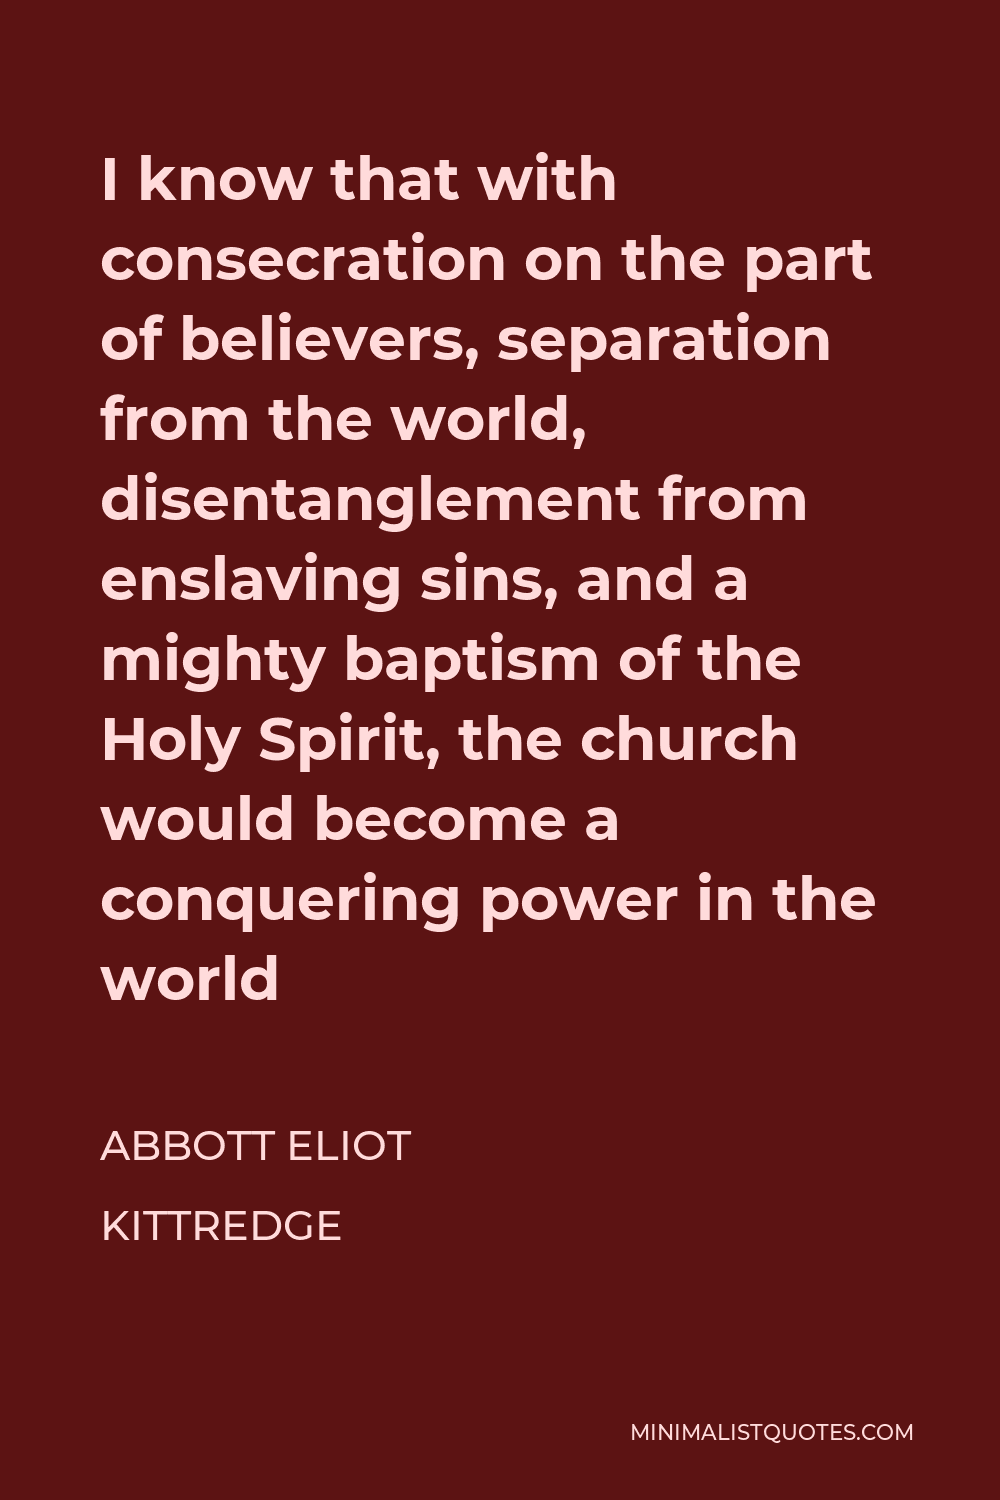 Abbott Eliot Kittredge Quote - I know that with consecration on the part of believers, separation from the world, disentanglement from enslaving sins, and a mighty baptism of the Holy Spirit, the church would become a conquering power in the world